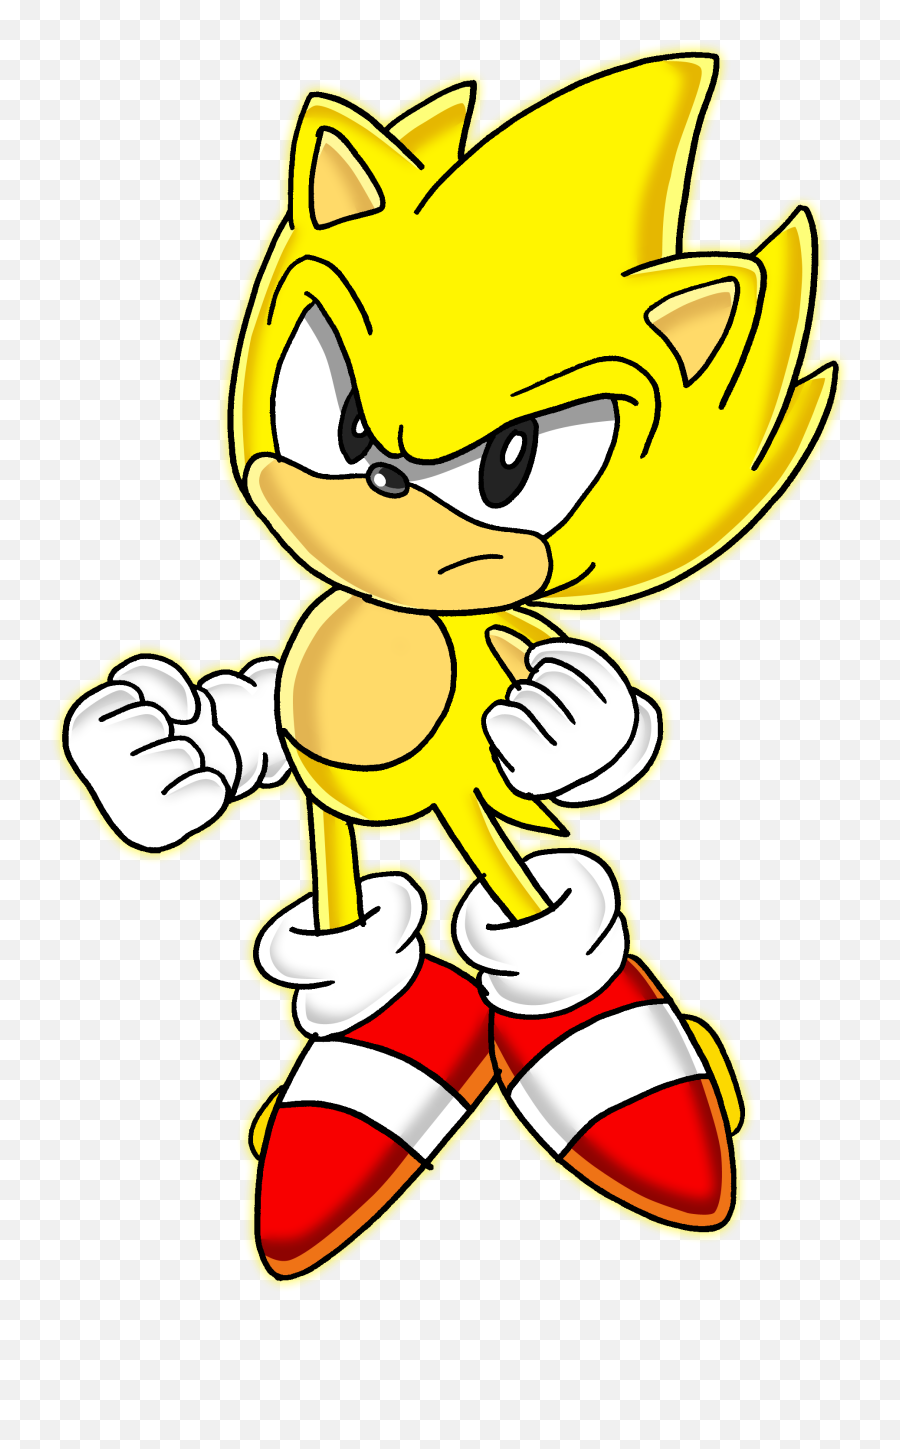 Download Classic Super Sonic - Classic Super Sonic Background Png,Super Sonic Png